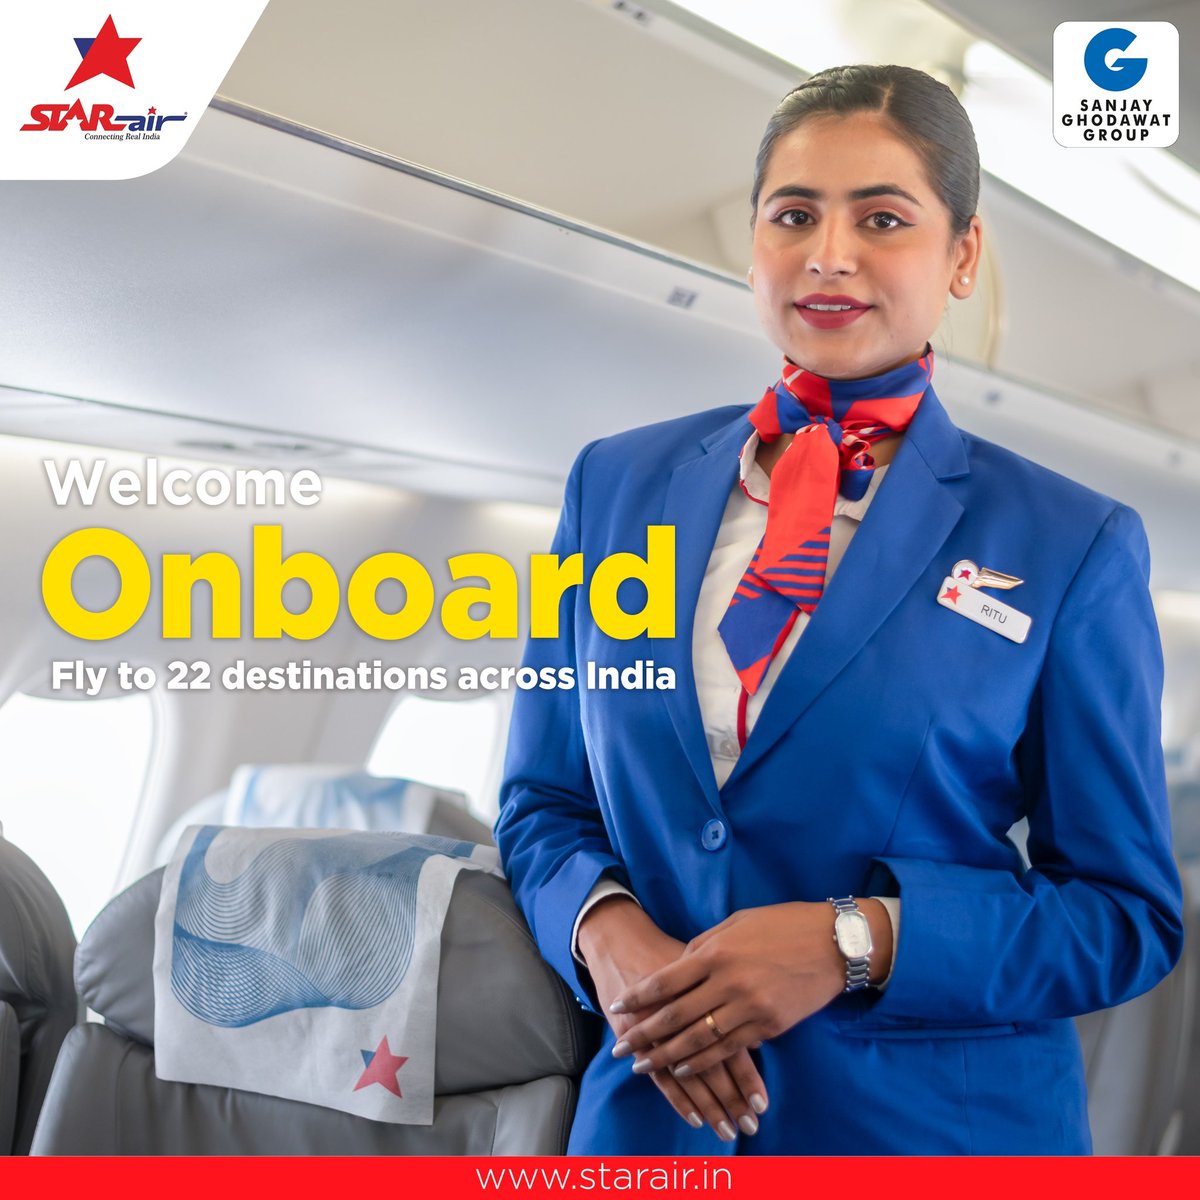 Welcome Onboard! Fly with us as we connect to 22 destinations across India. Choose Star Air as your travel companion for your future travel plans. #ConnectingReallndia #flywithstarair #NewRoute #StarAir #SanjayGhodawatGroup #MoCA #RCS